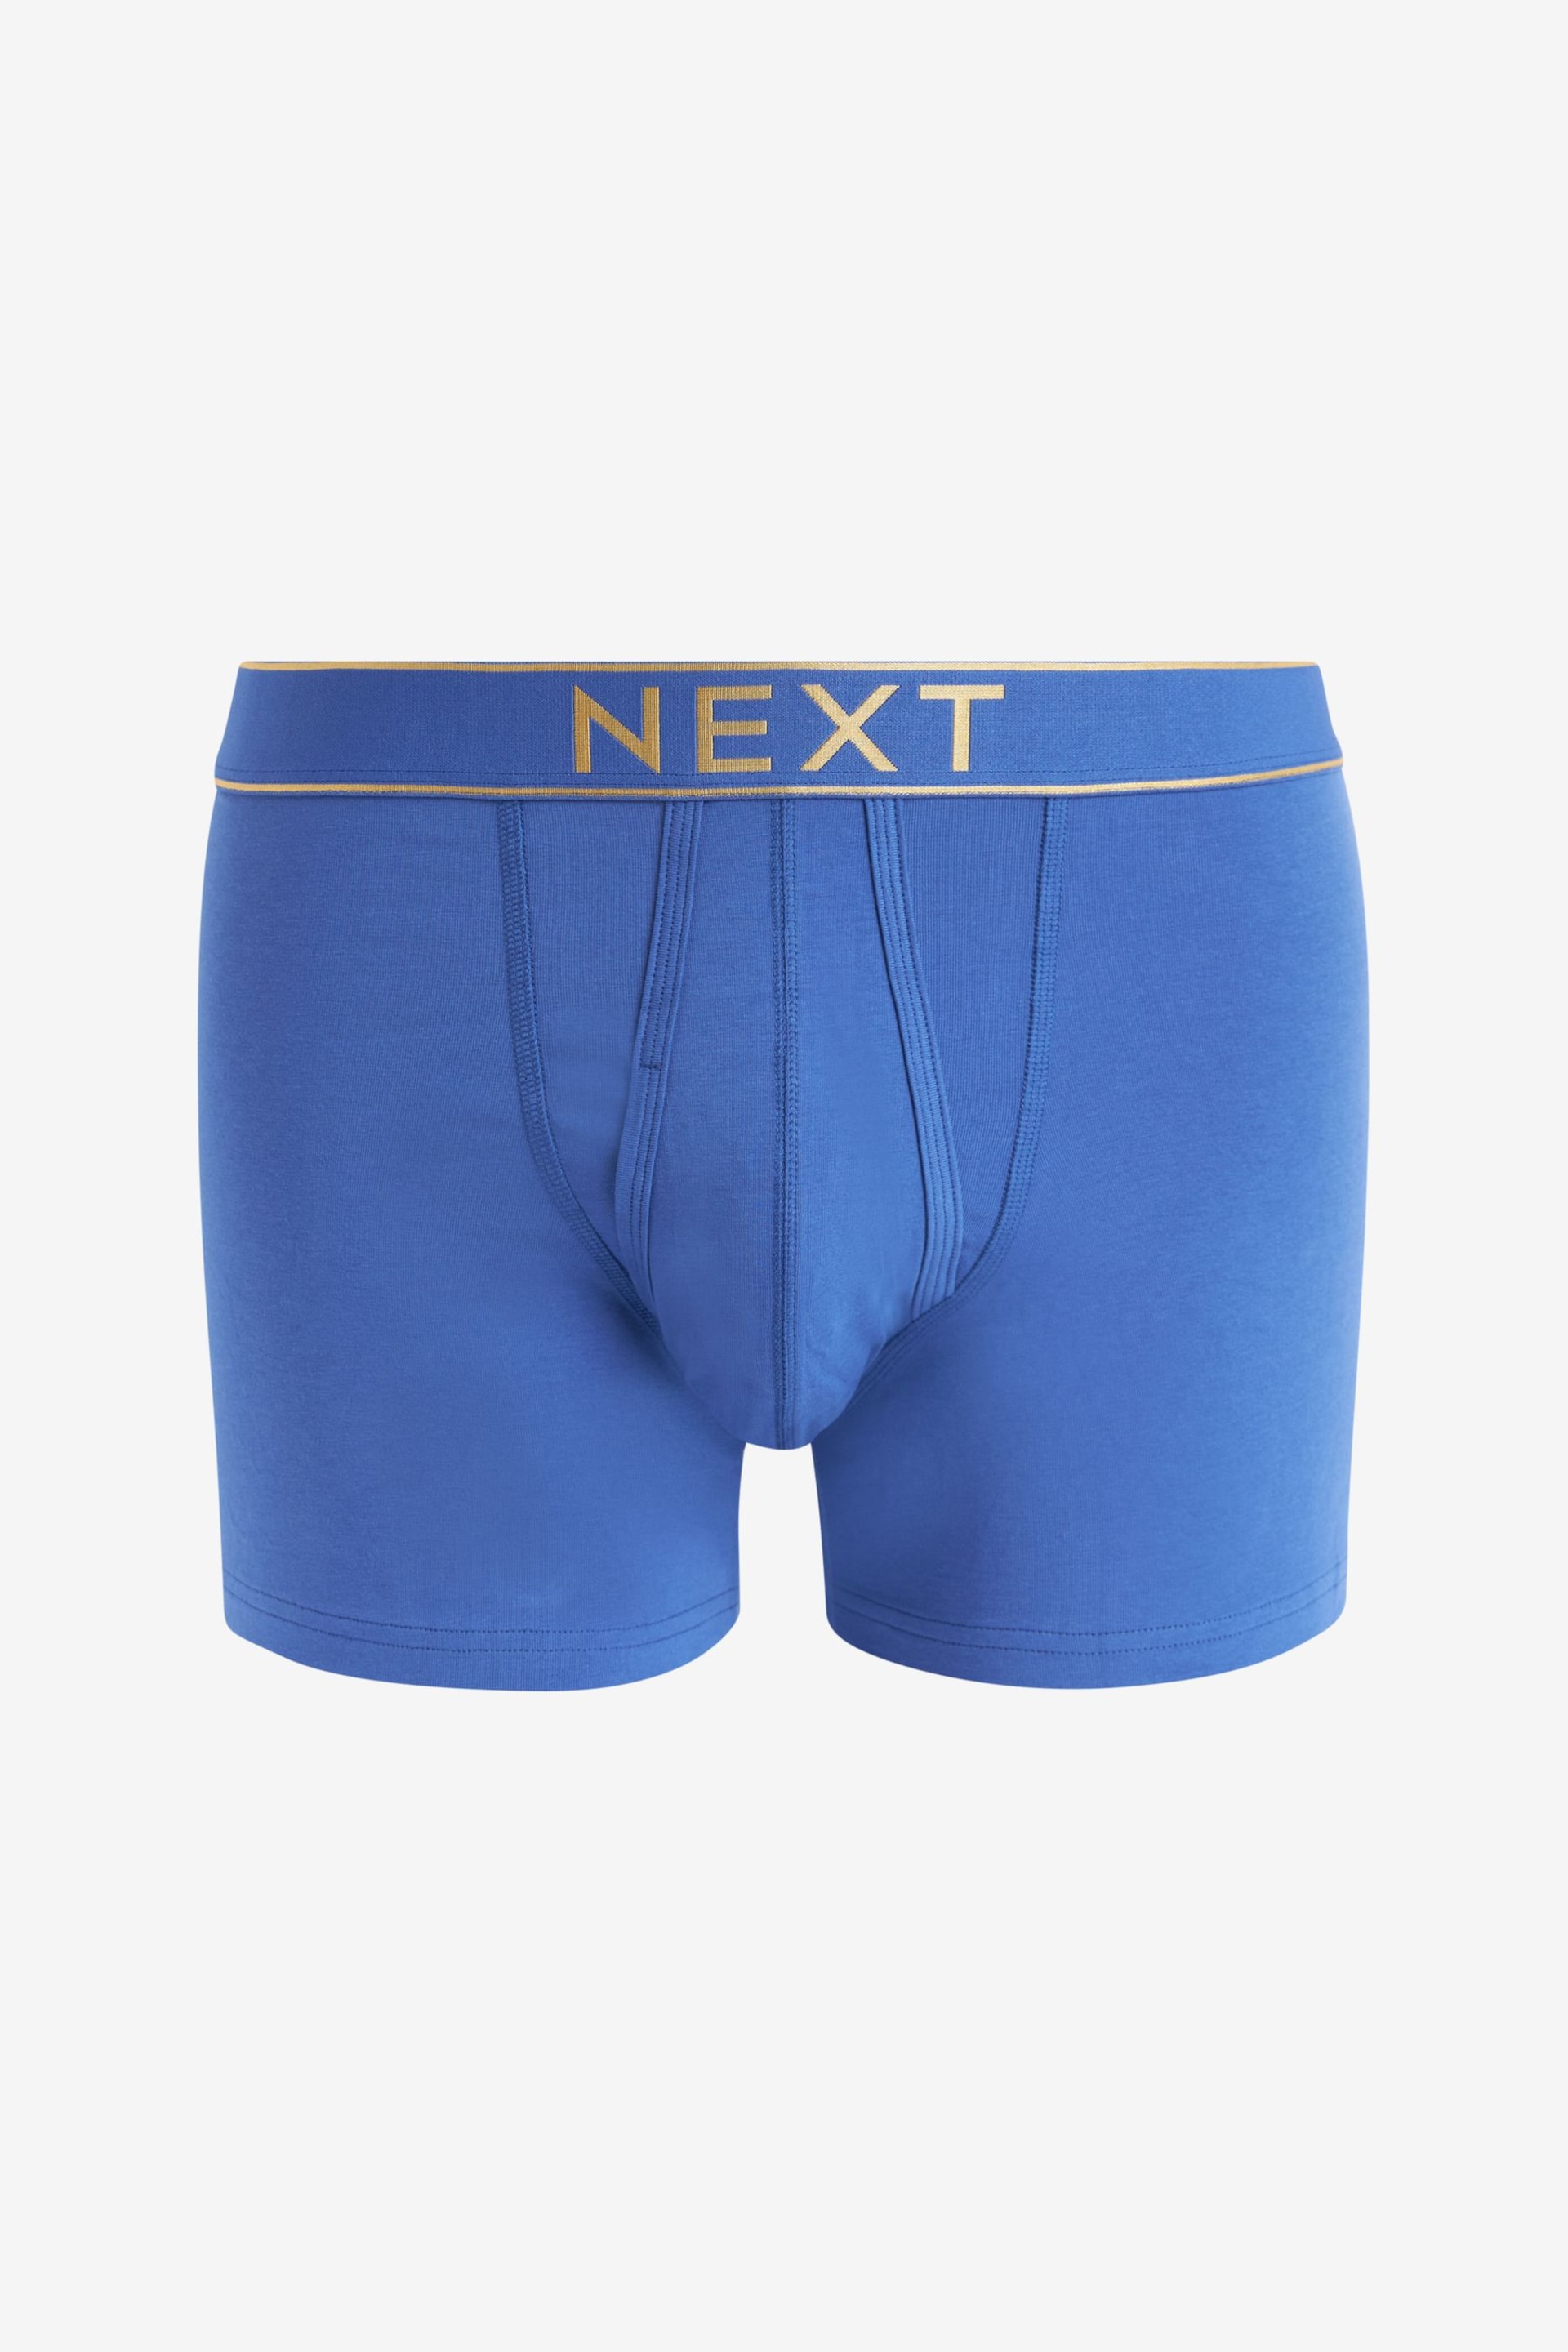 Blue Gold Waistband 10 pack A-Front Boxers - Image 6 of 13